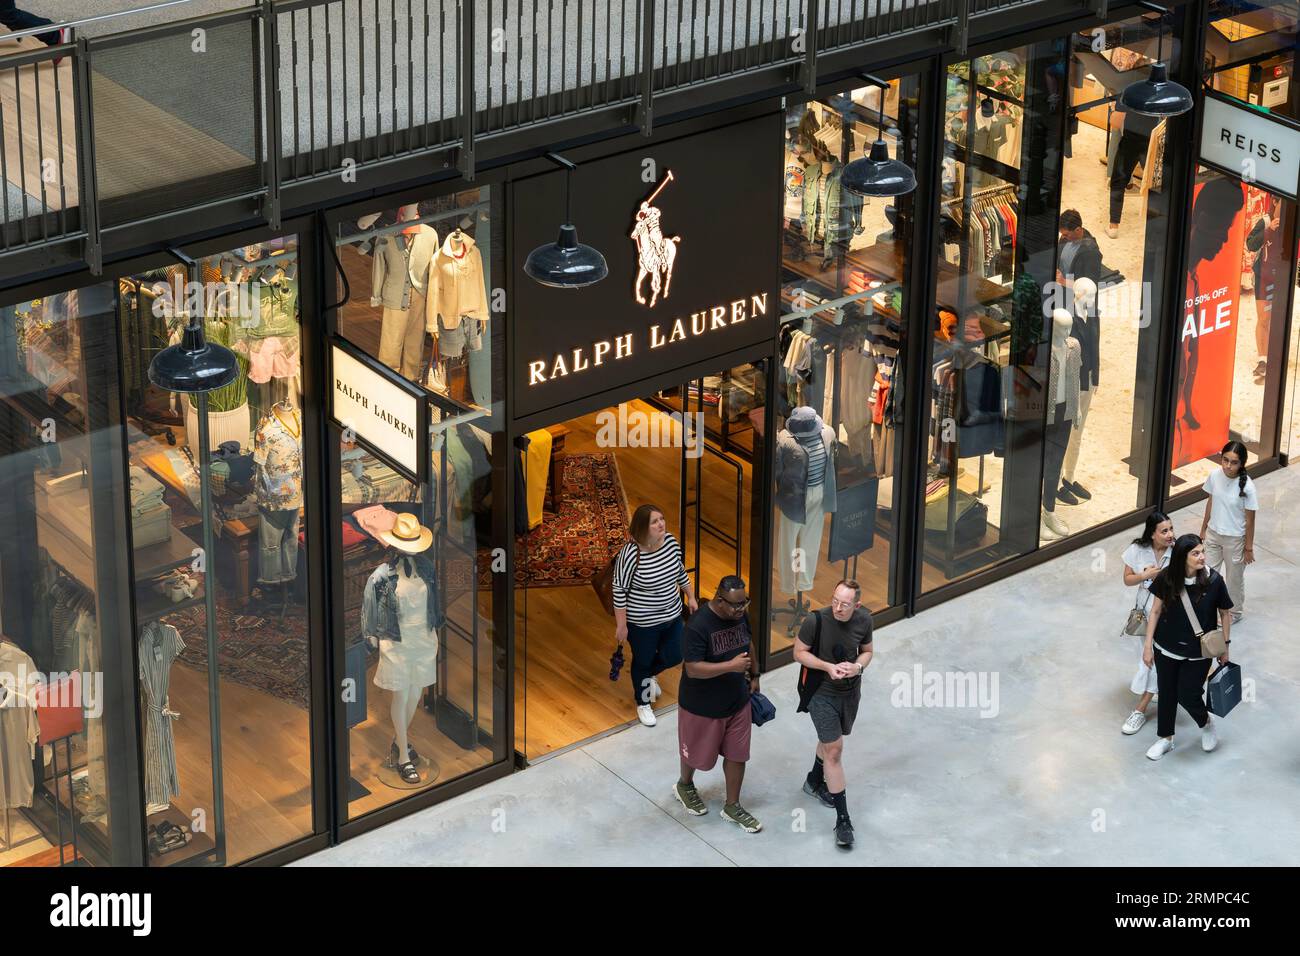 Shoppers browsing in a Ralph Lauren outlet store in Turbine Hall A within the refurbed Grade II* listed Battersea Power Station in London, England Stock Photo